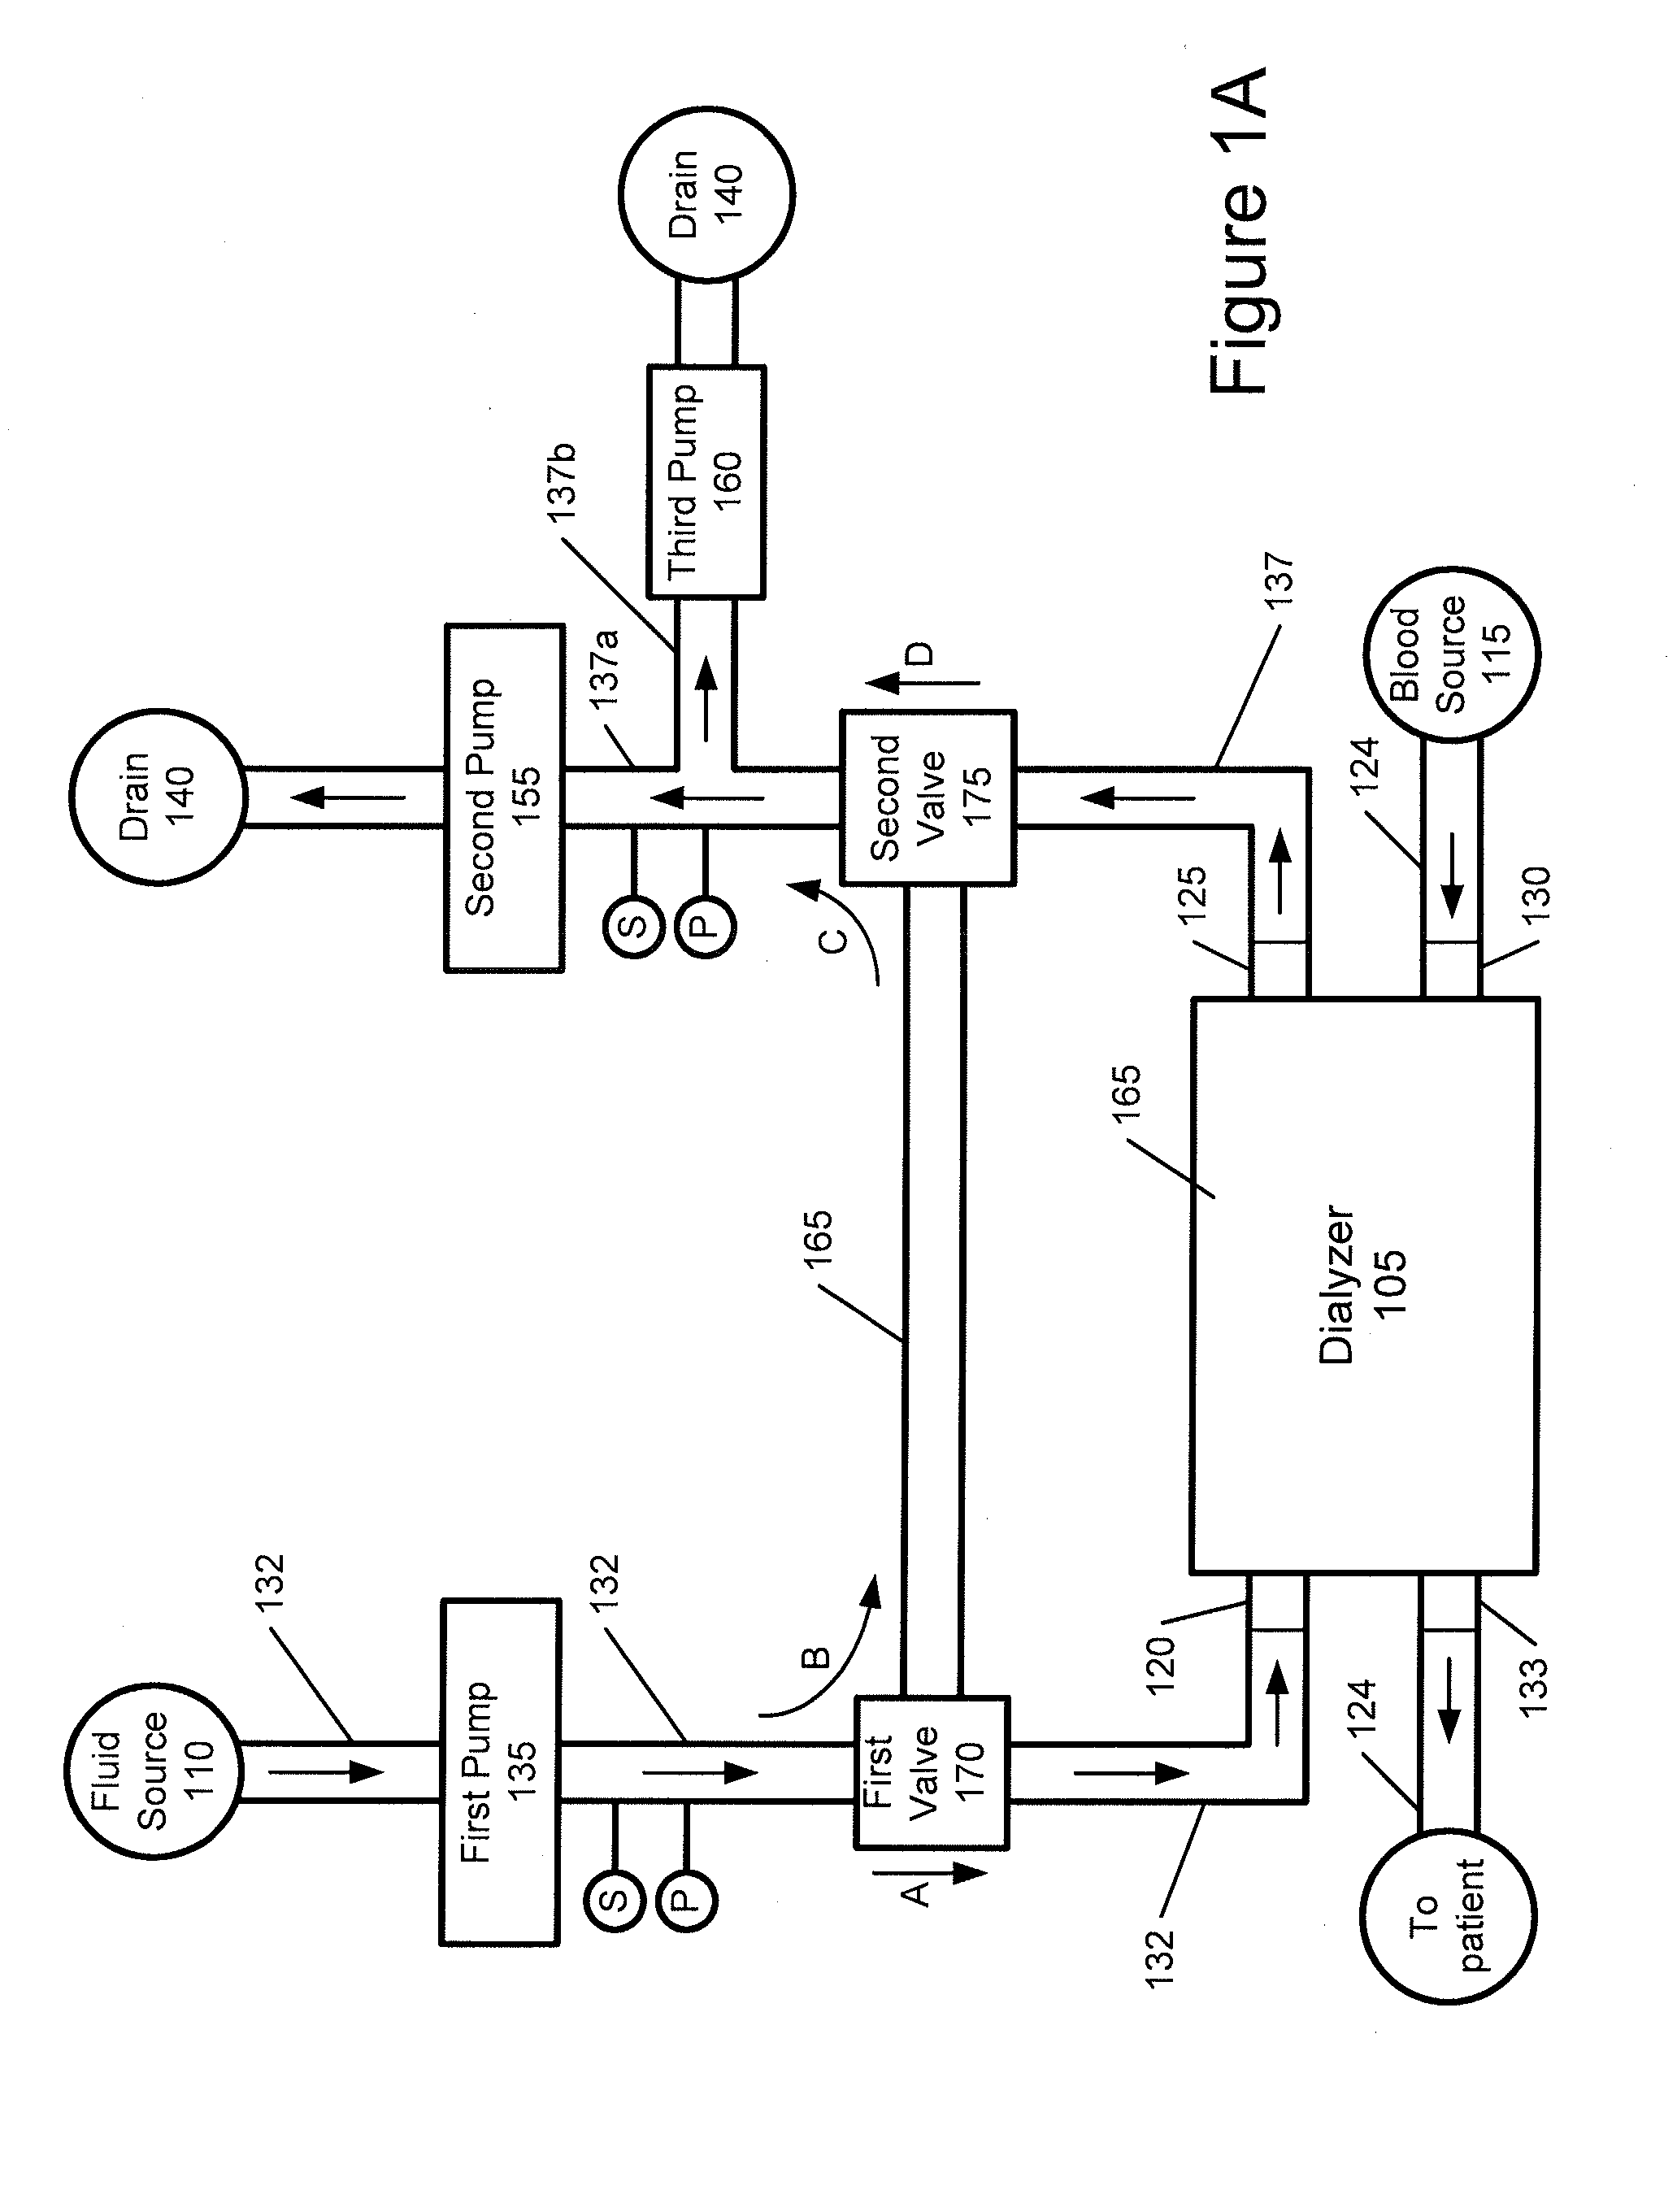 Dialysis system with ultrafiltration control